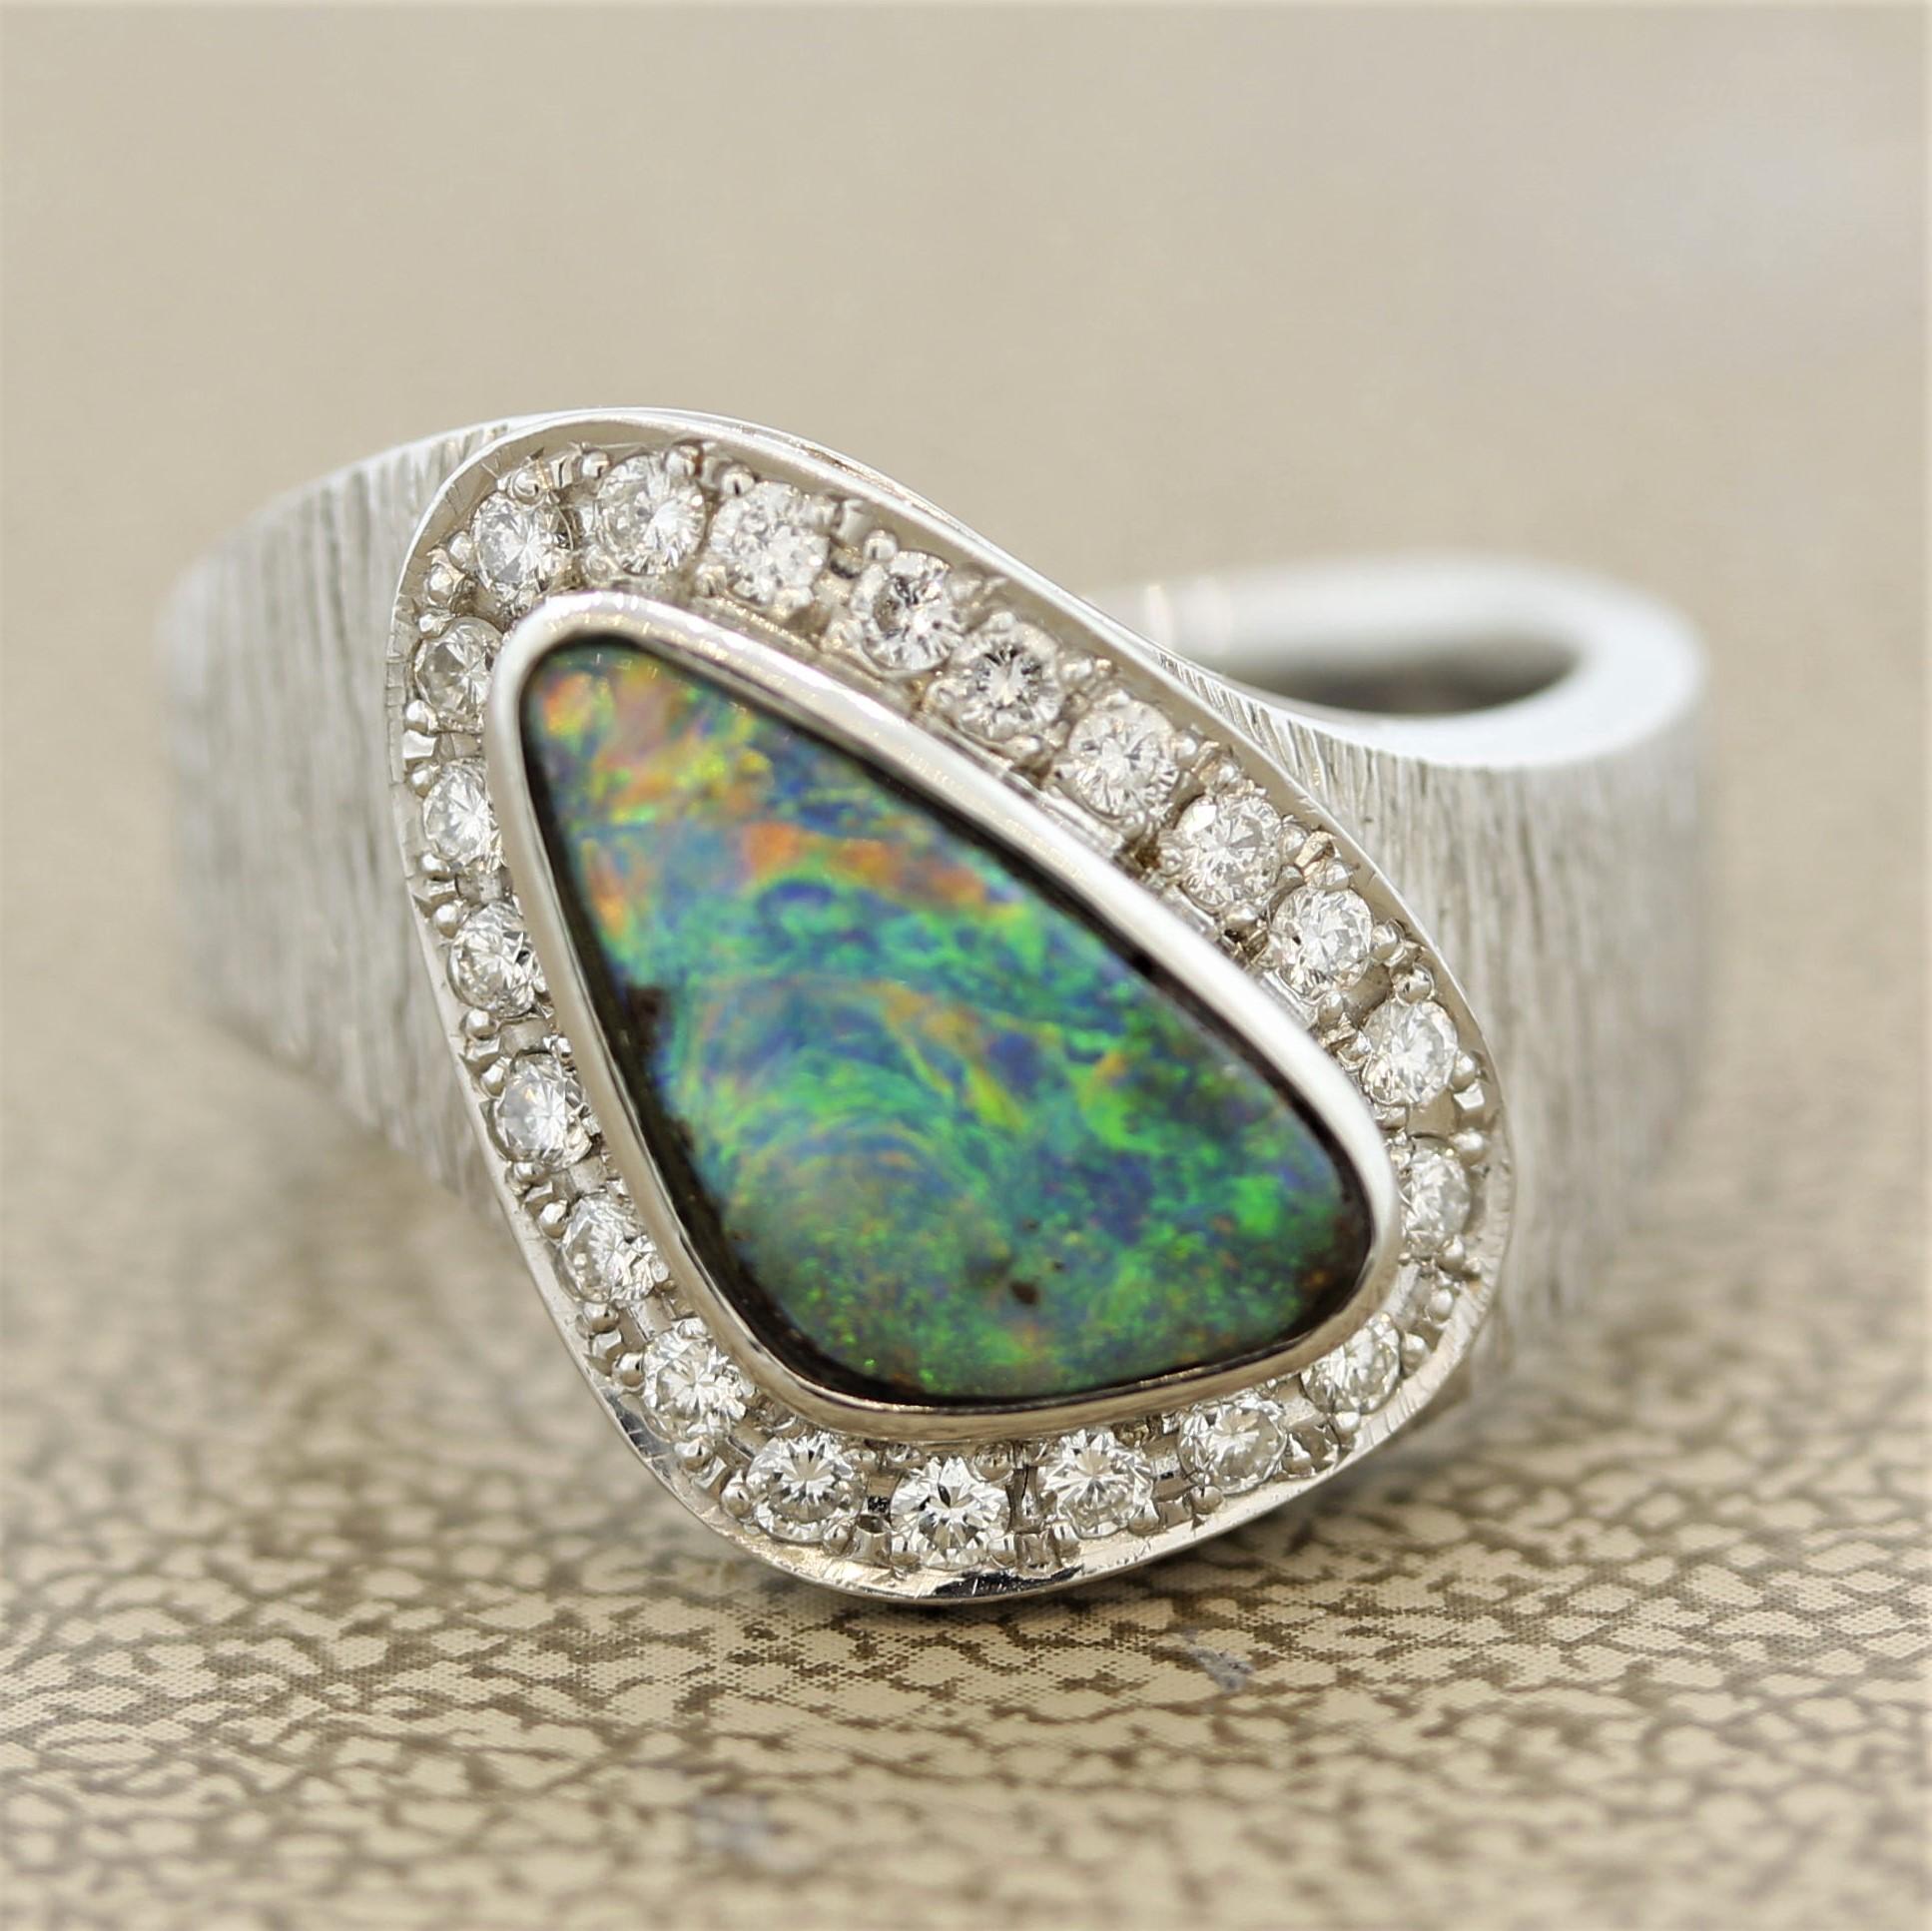 A lovely platinum ring featuring a 1.46 carat boulder opal from Australia. It has great play of color as swirls of green and blue as well as hints of orangy reds can be seen on the opal. It is accented by 0.28 carats of round brilliant cut diamonds